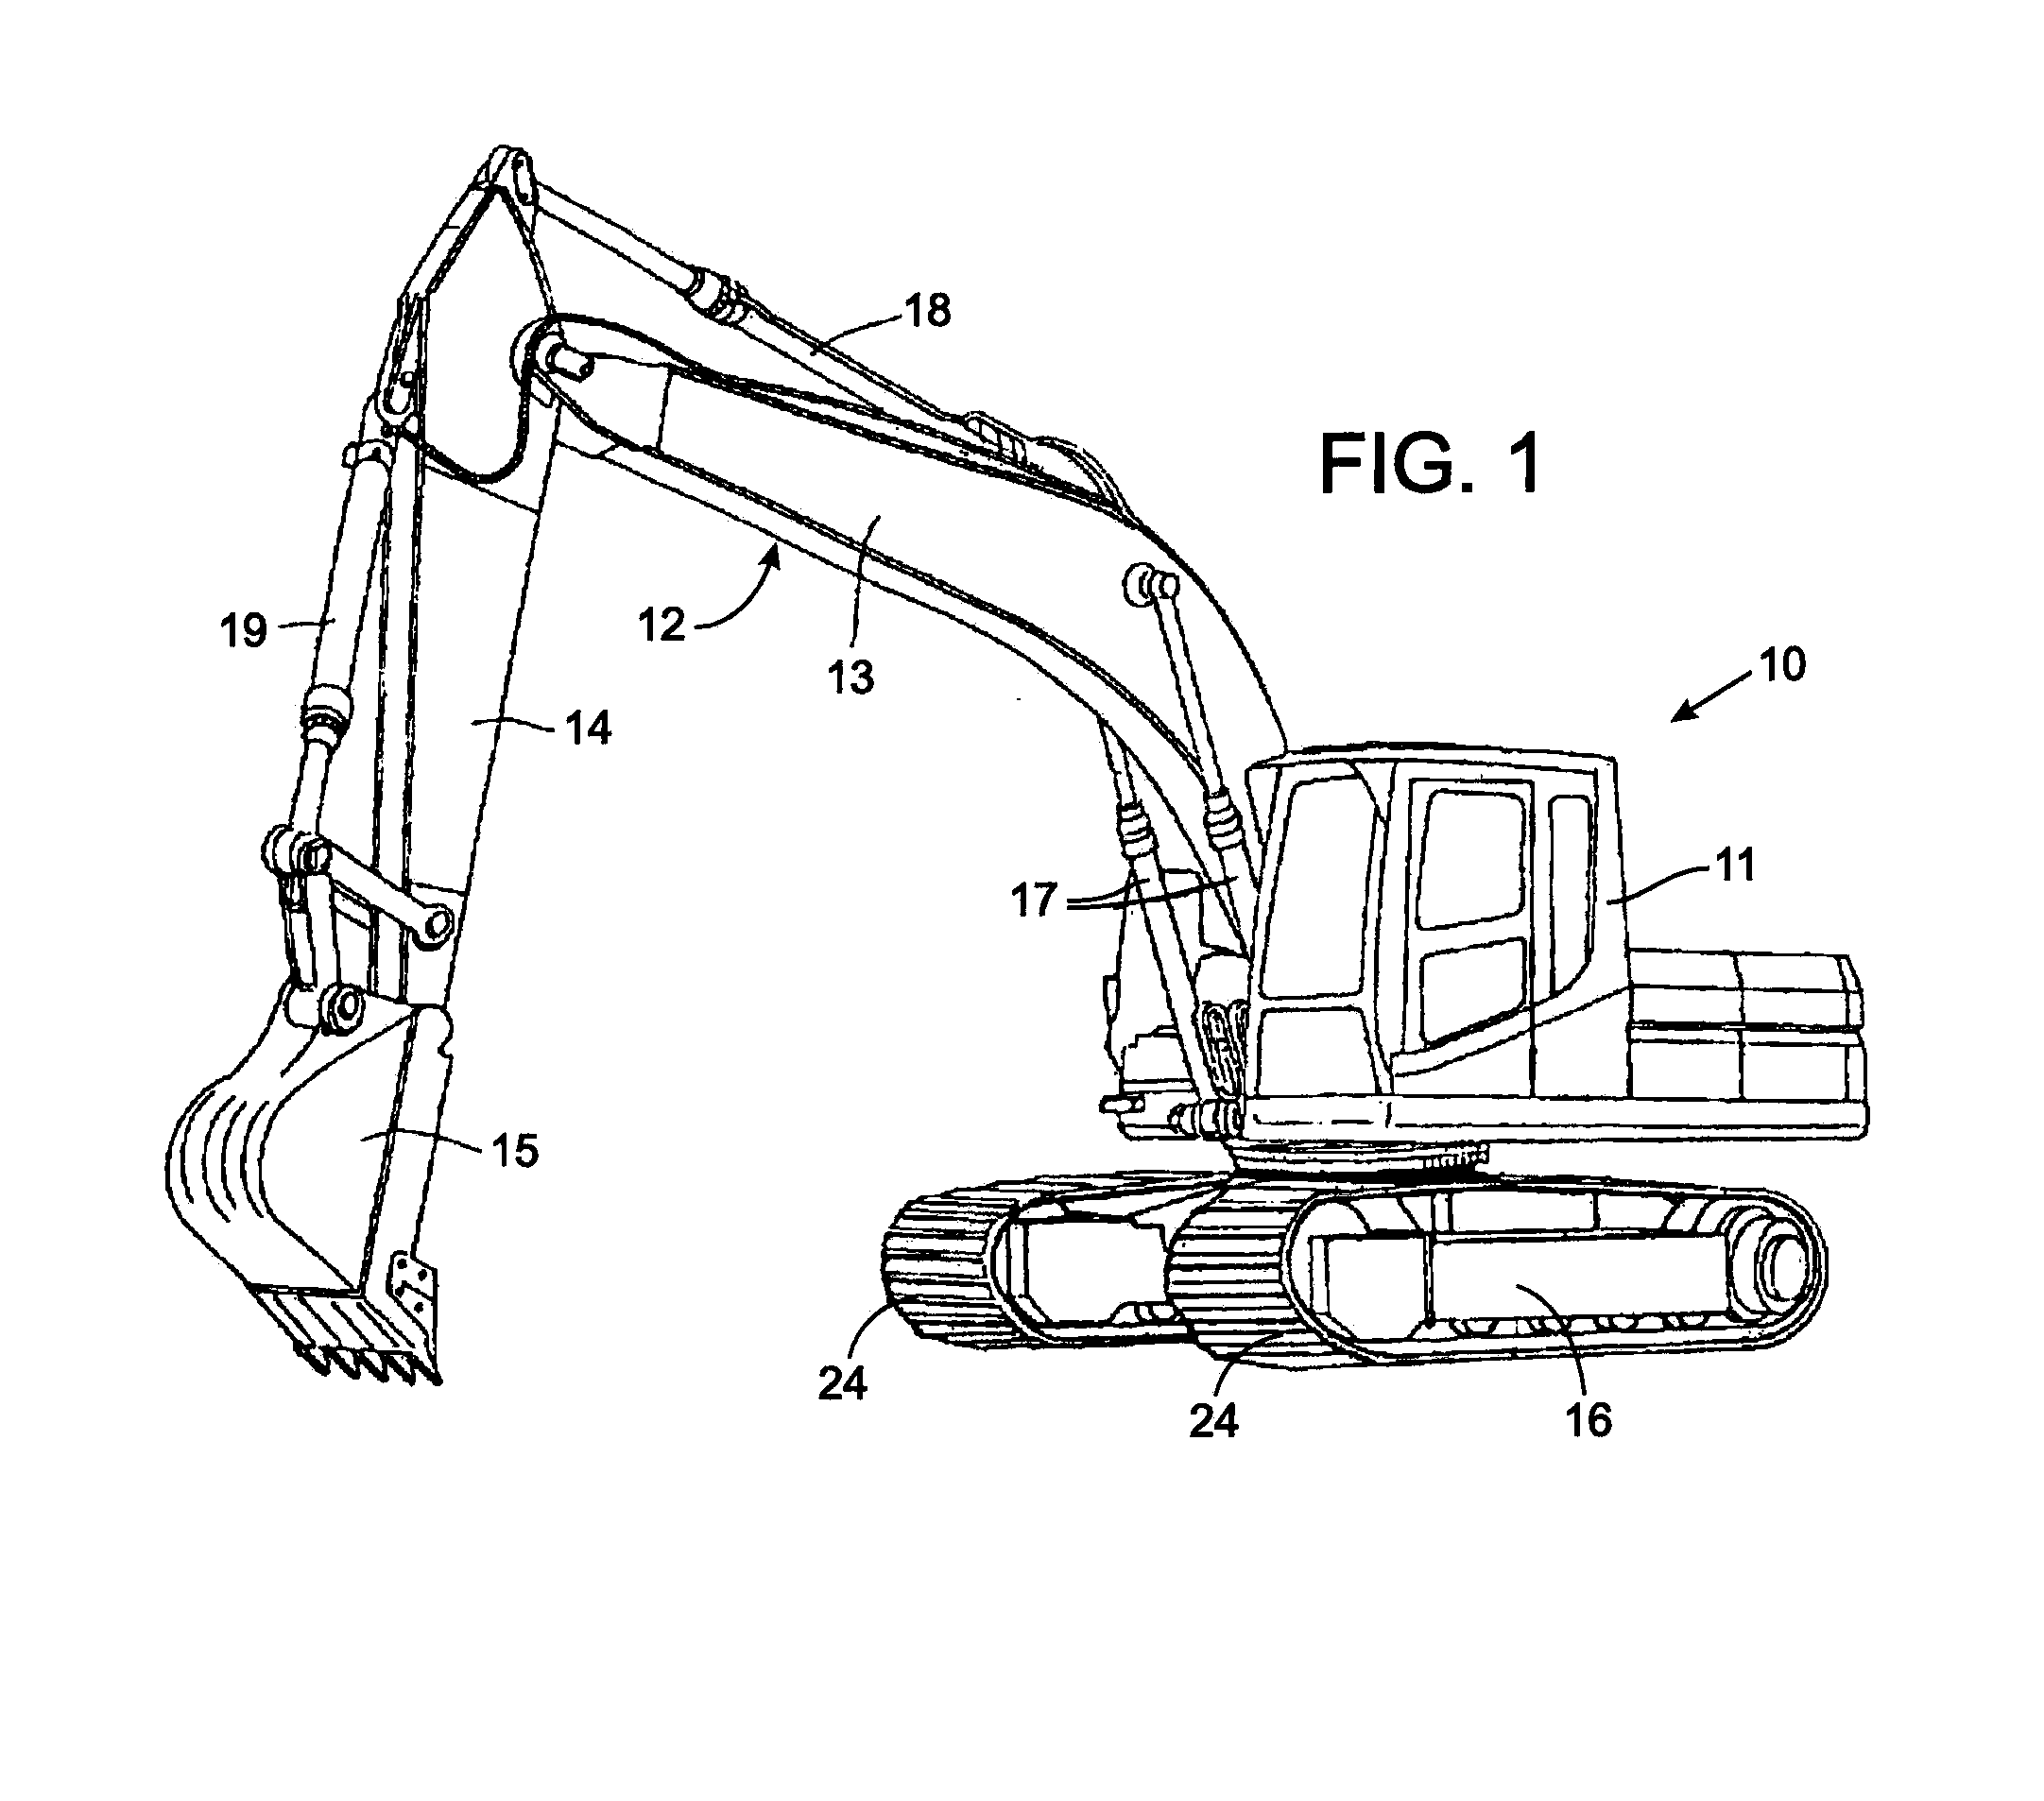 Multiple function hydraulic system with a variable displacement pump and a hydrostatic pump-motor